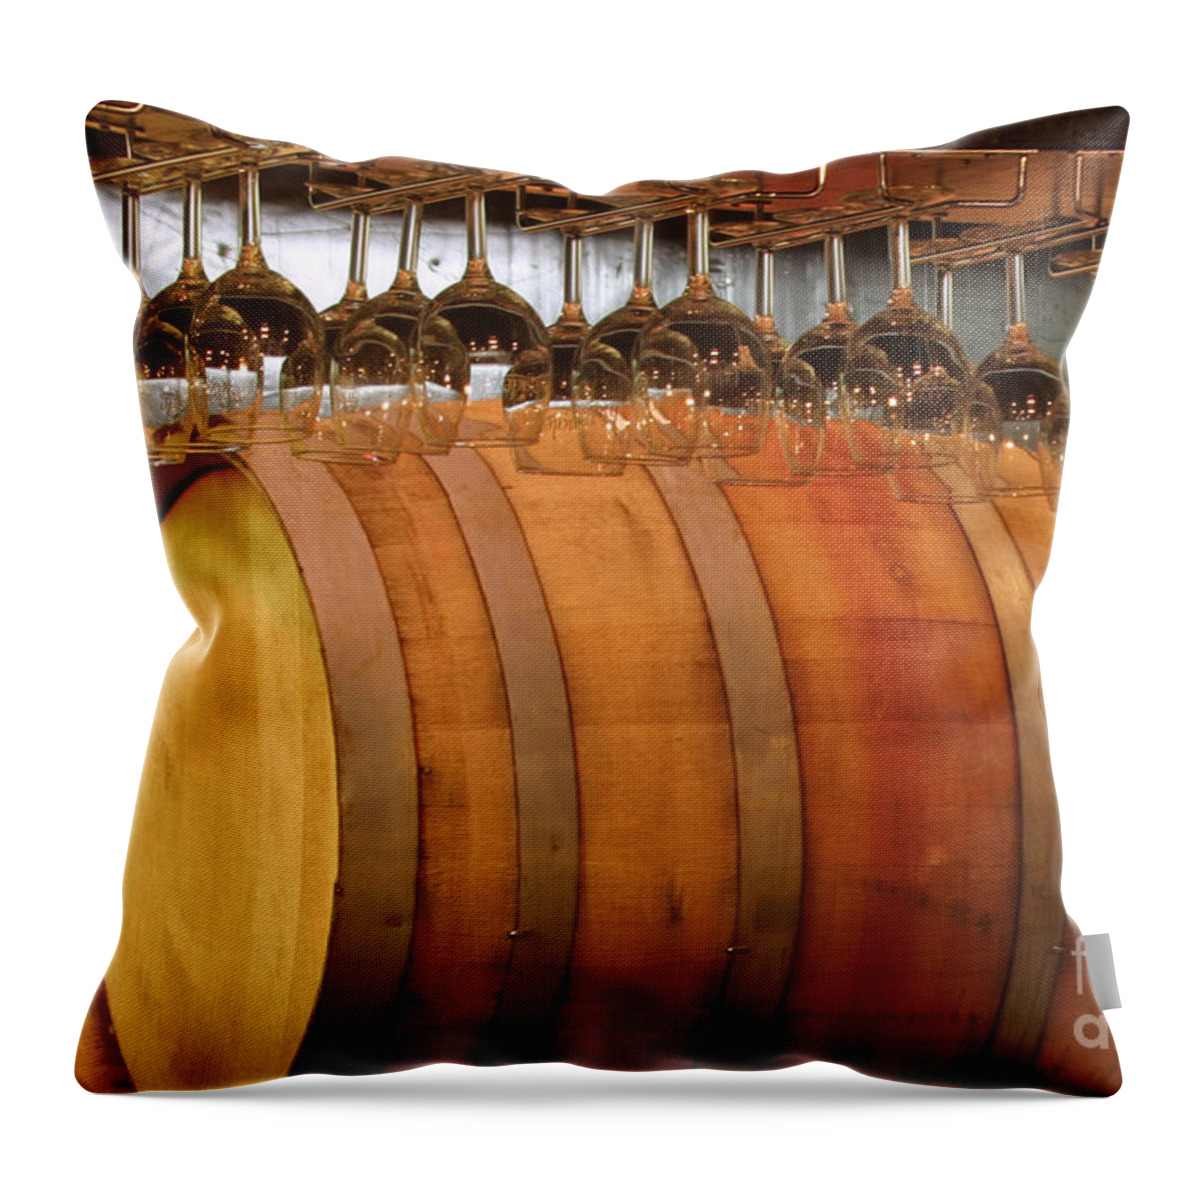 Vineyard Throw Pillow featuring the photograph Tasting Room Barrels by Kathy Strauss